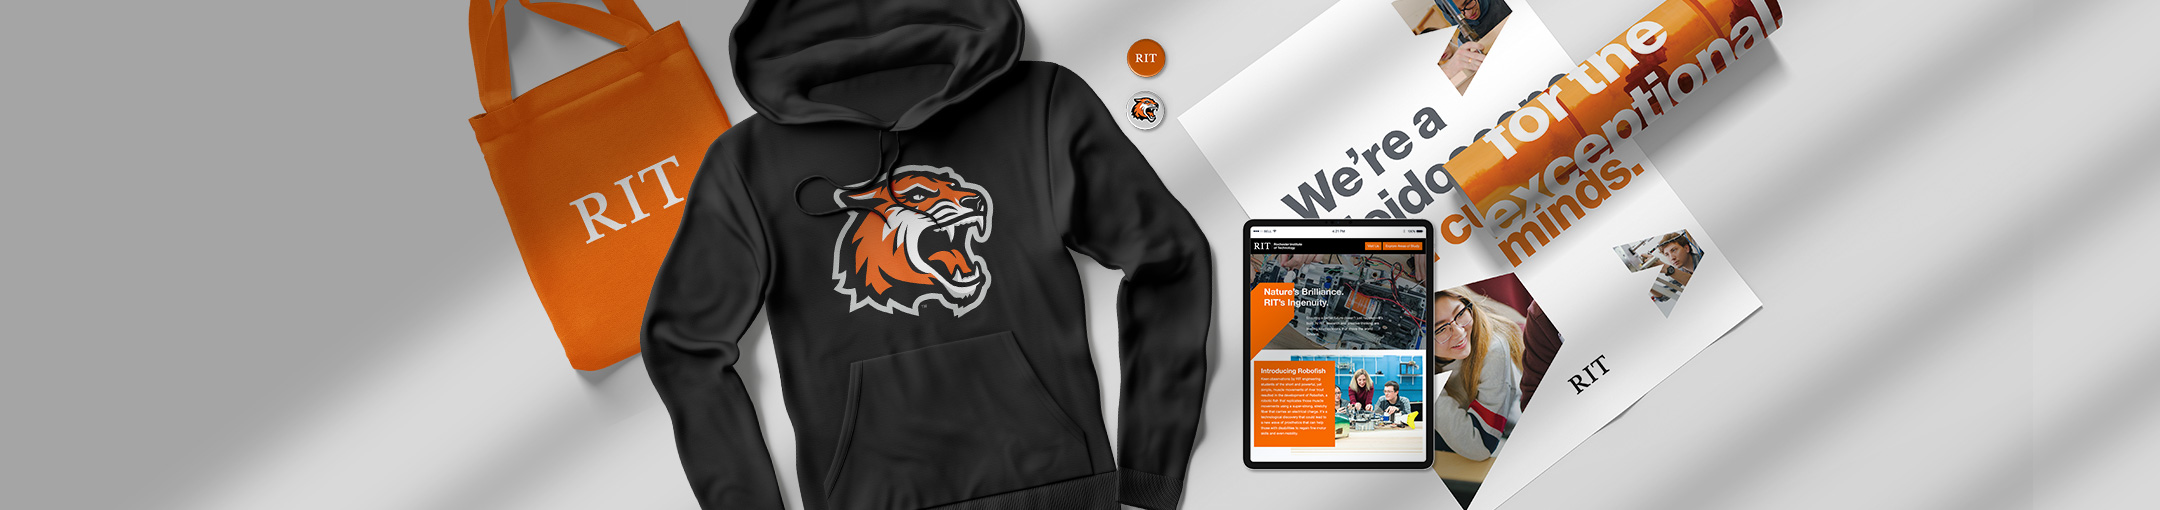 Collage of RIT branded apparel and marketing material